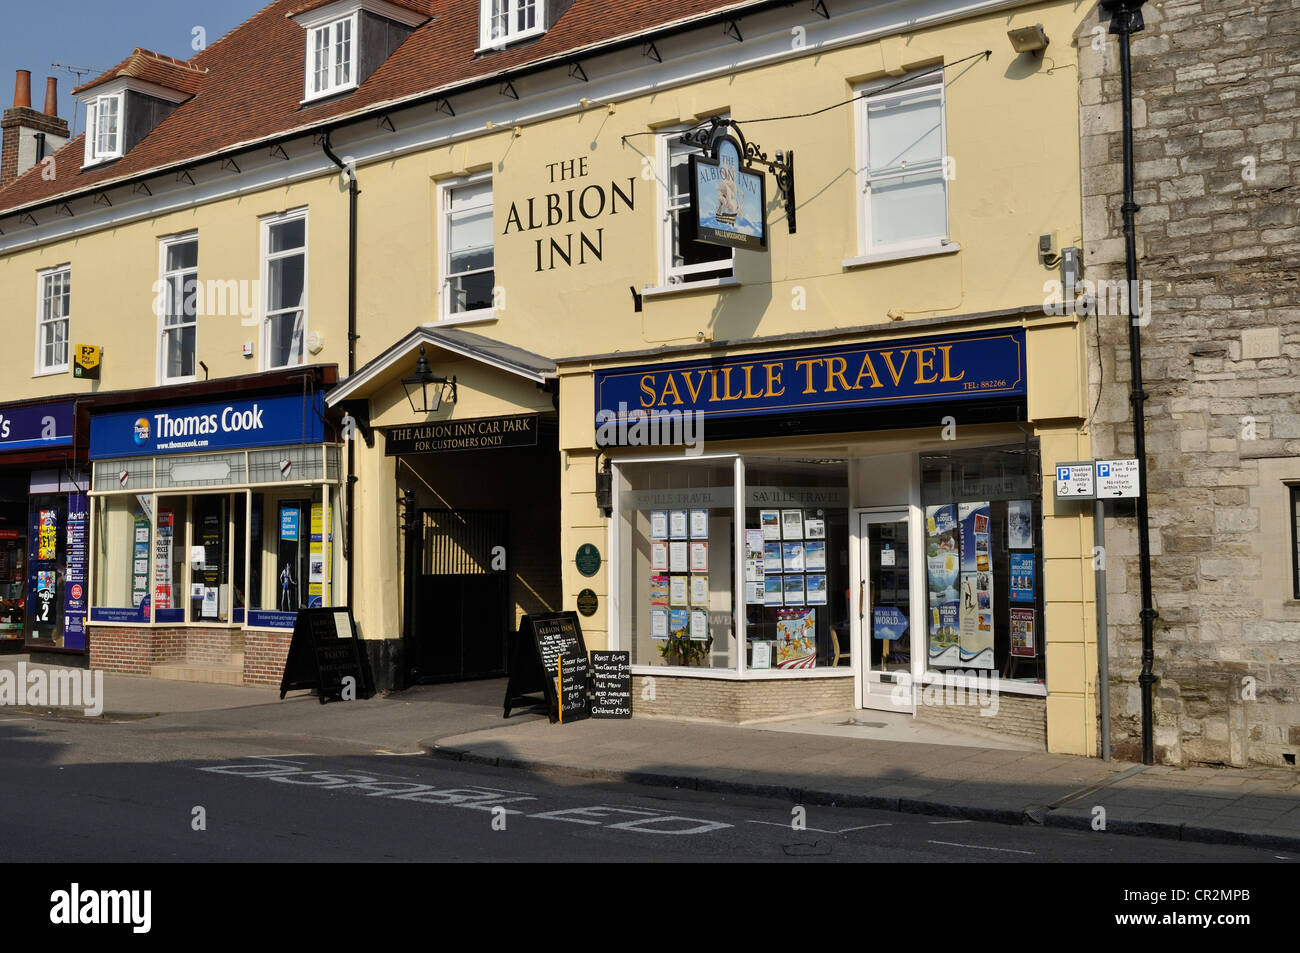 The Albion Inn public house in Wimborne Minster, Dorset. The entrance is flanked by two travel agents. Stock Photo